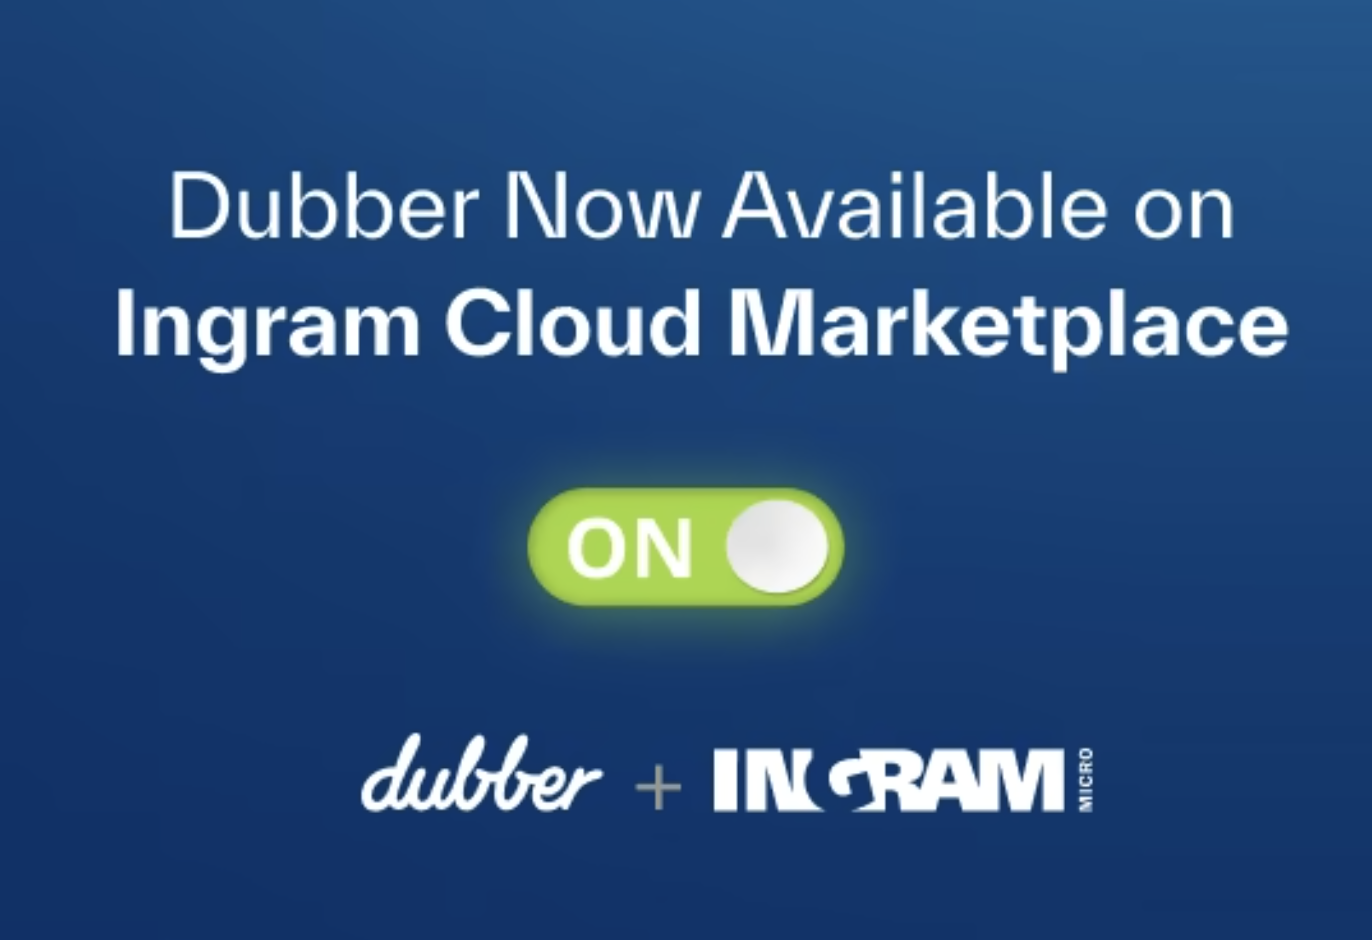 Dubber Unified Call Recording Arrives on the Ingram Cloud Marketplace in EMEA